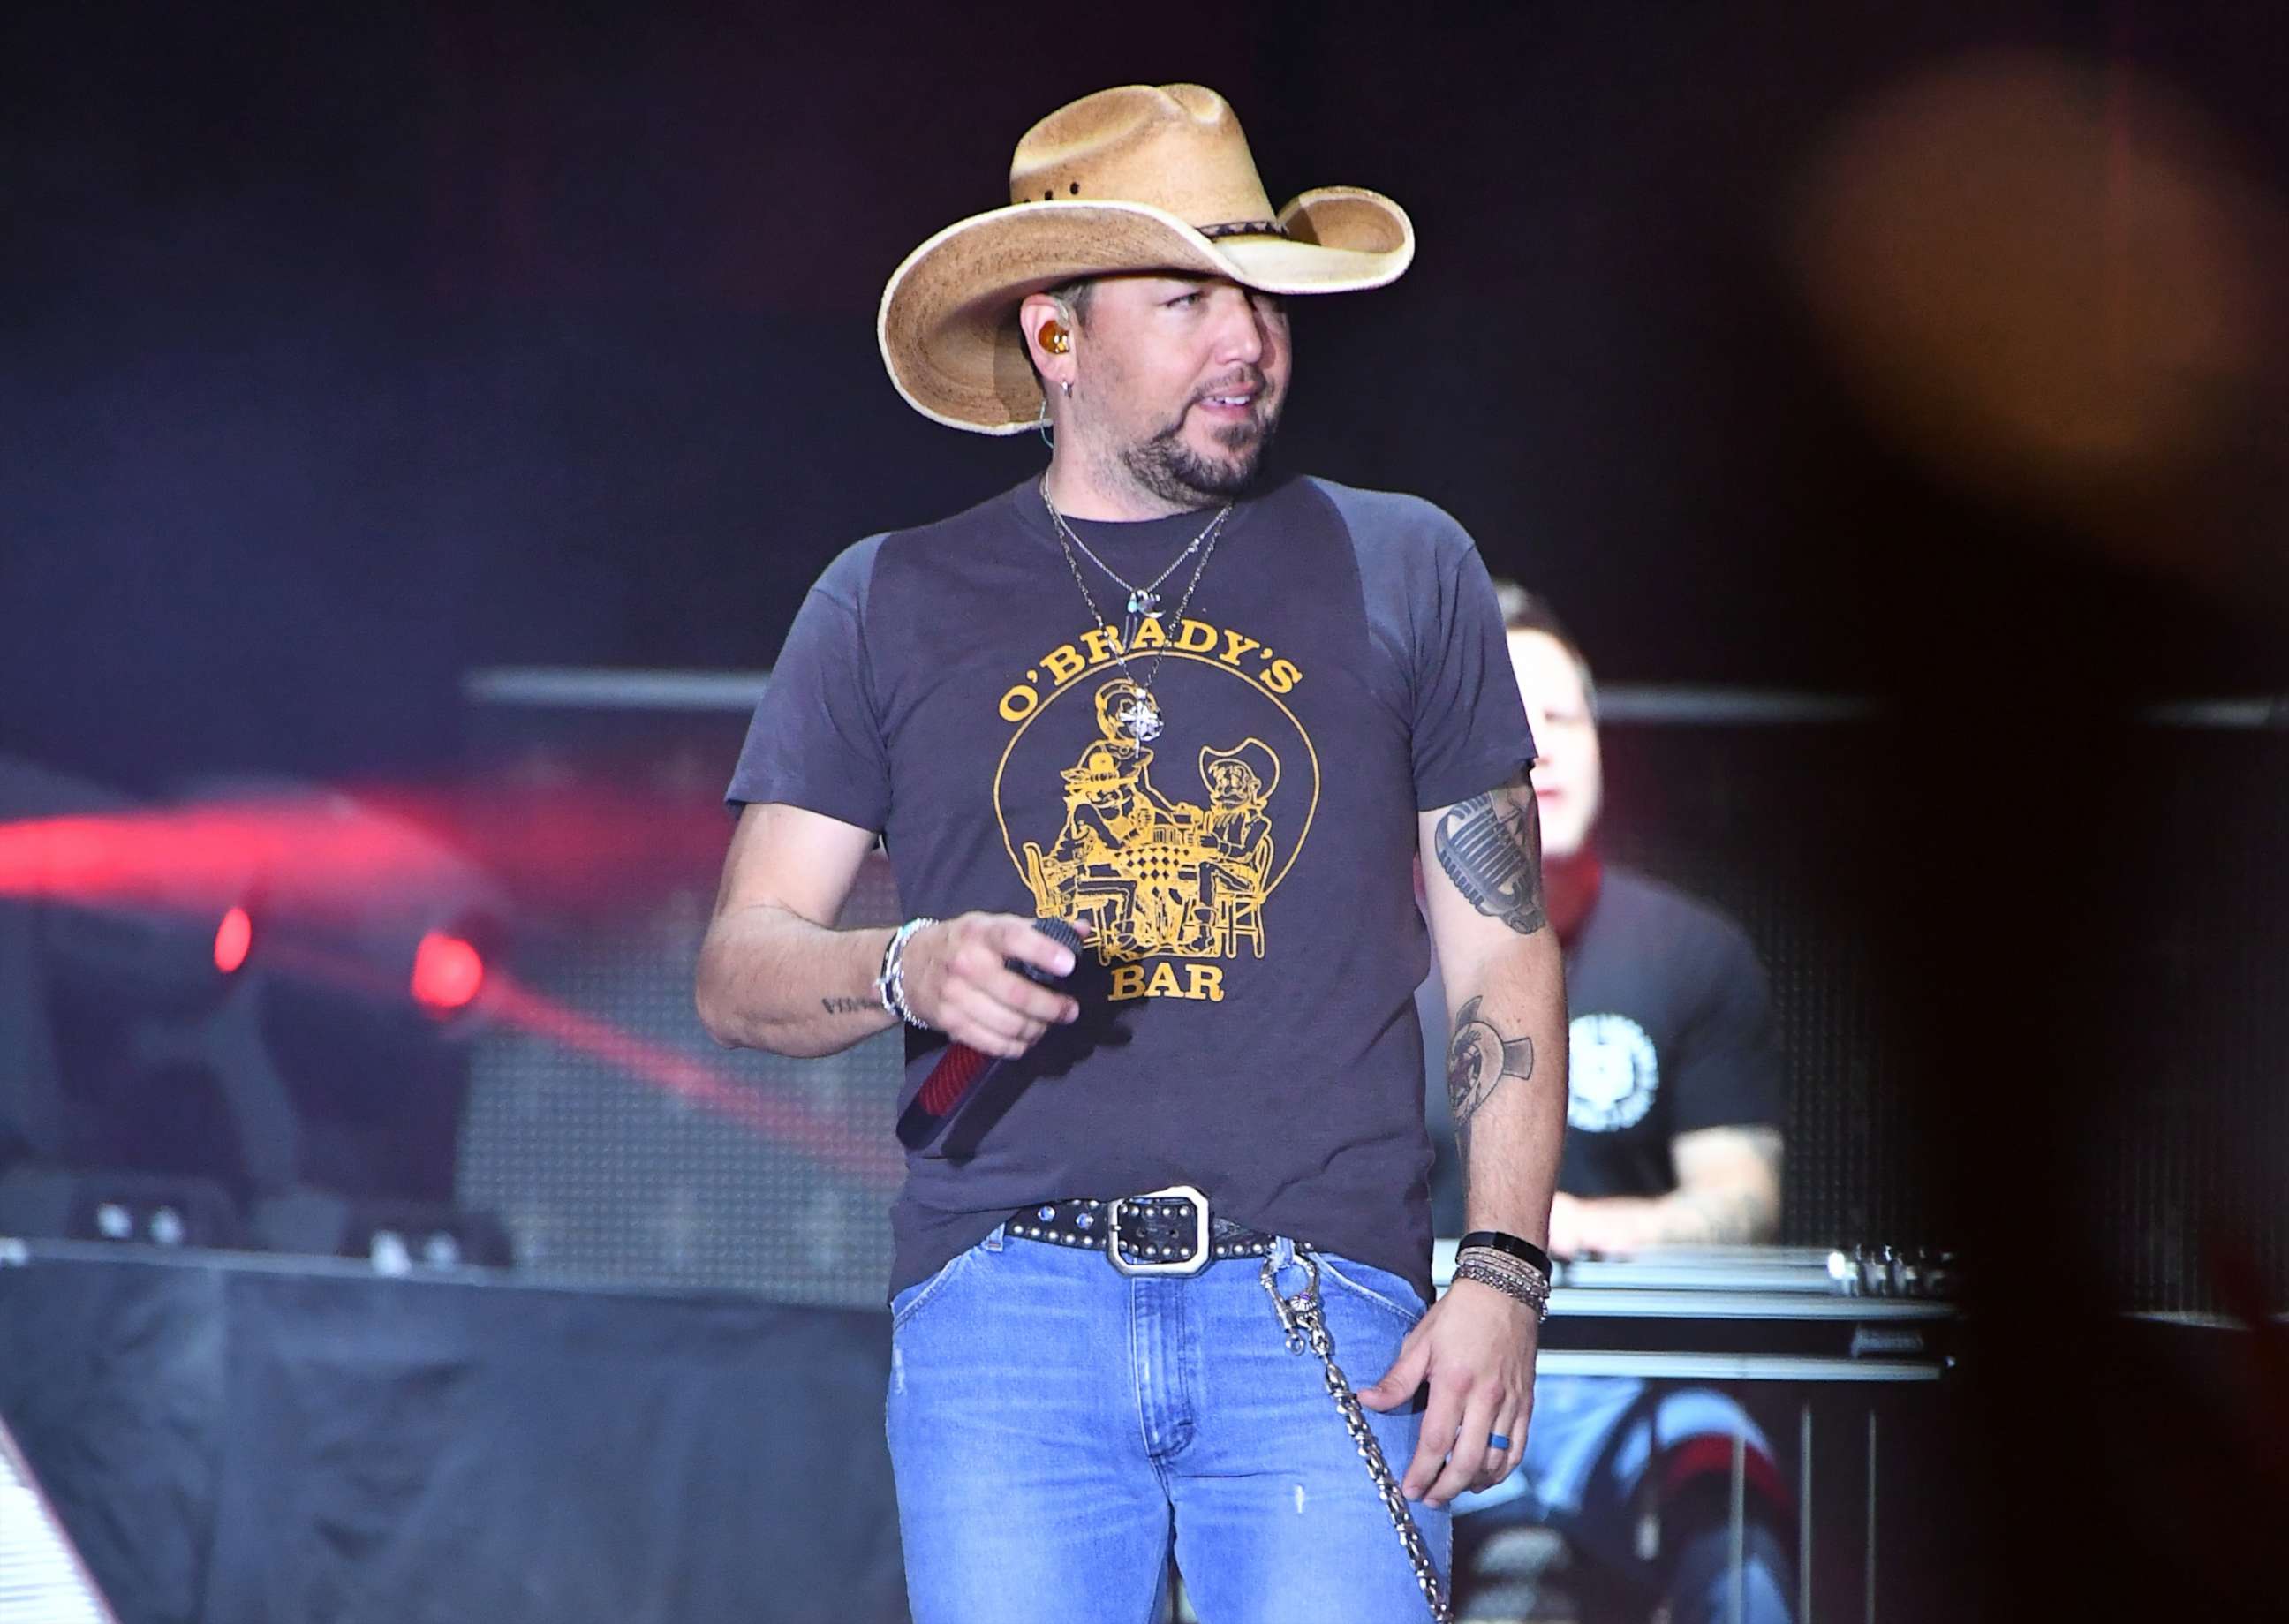 PHOTO: Recording artist Jason Aldean performs during the Route 91 Harvest country music festival at the Las Vegas Village, Oct. 1, 2017 in Las Vegas, Nevada. 